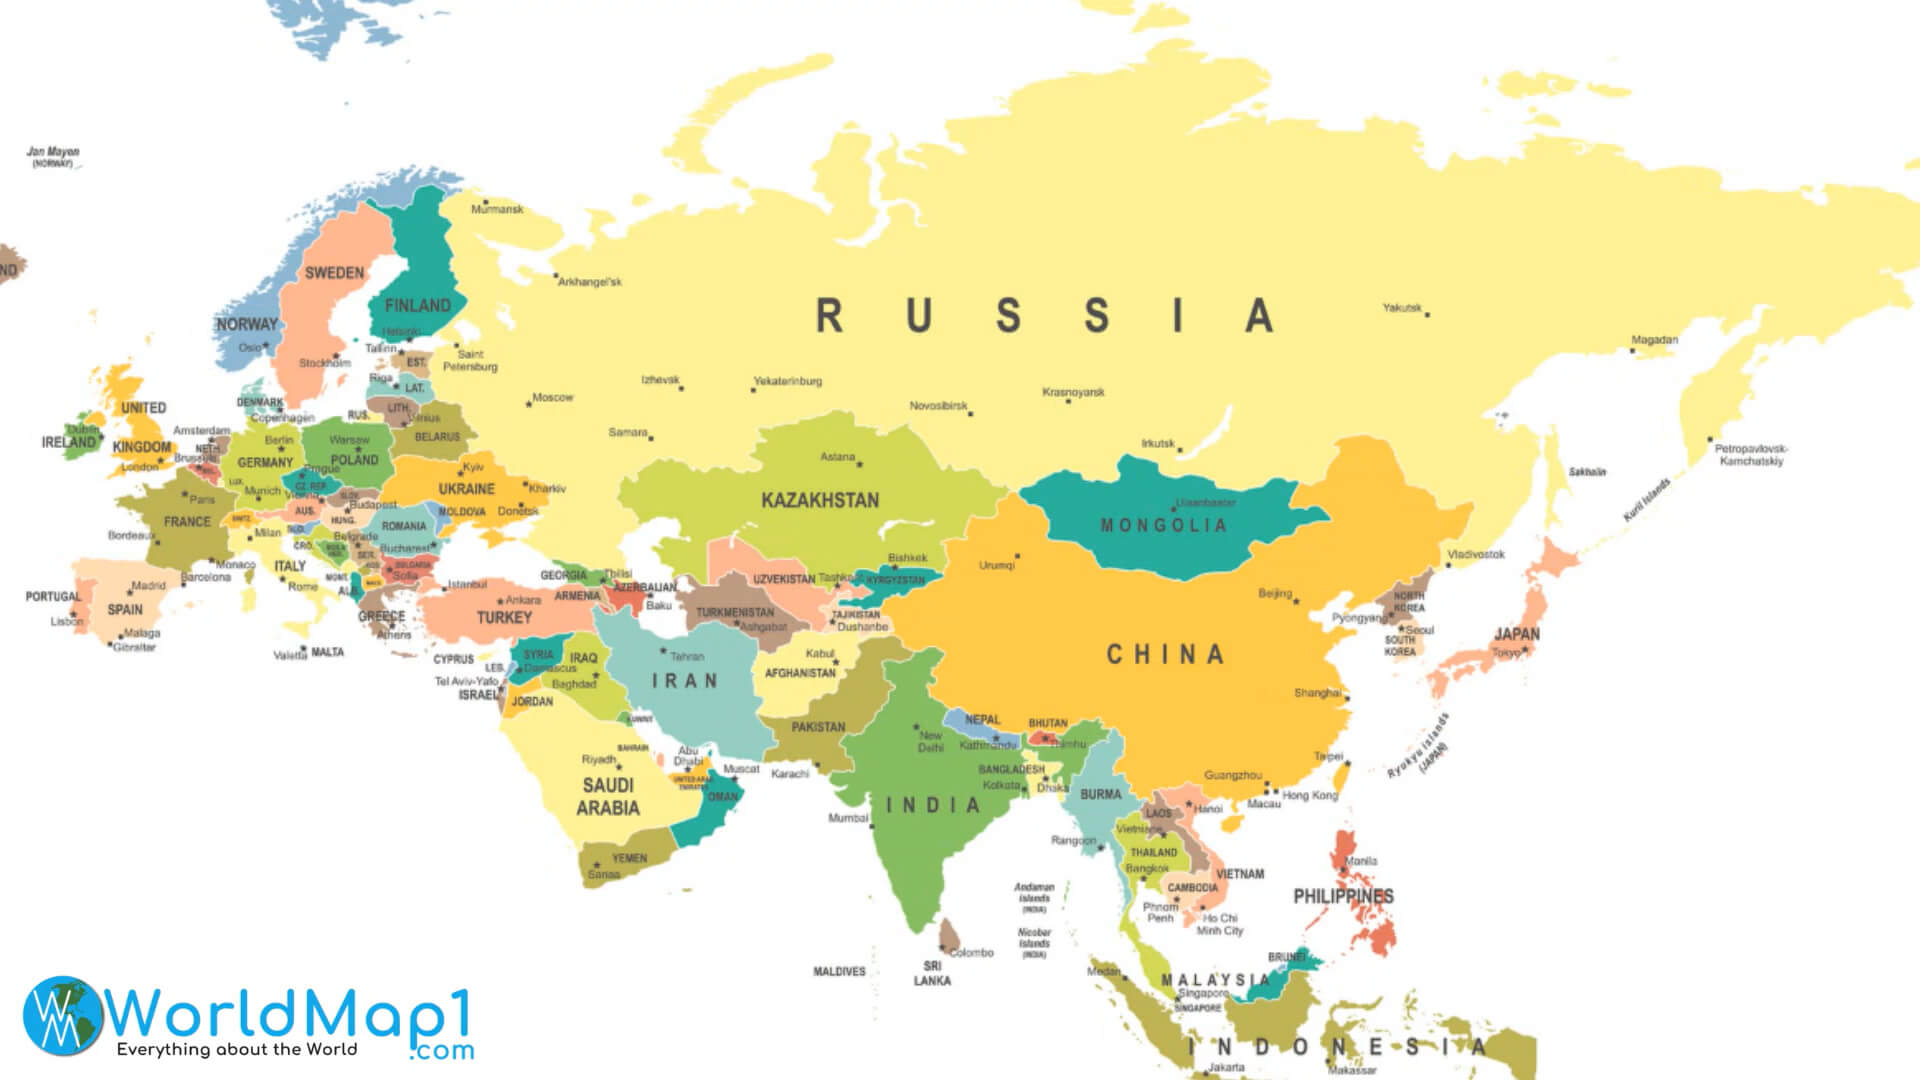 Map of Russia with Euroasia